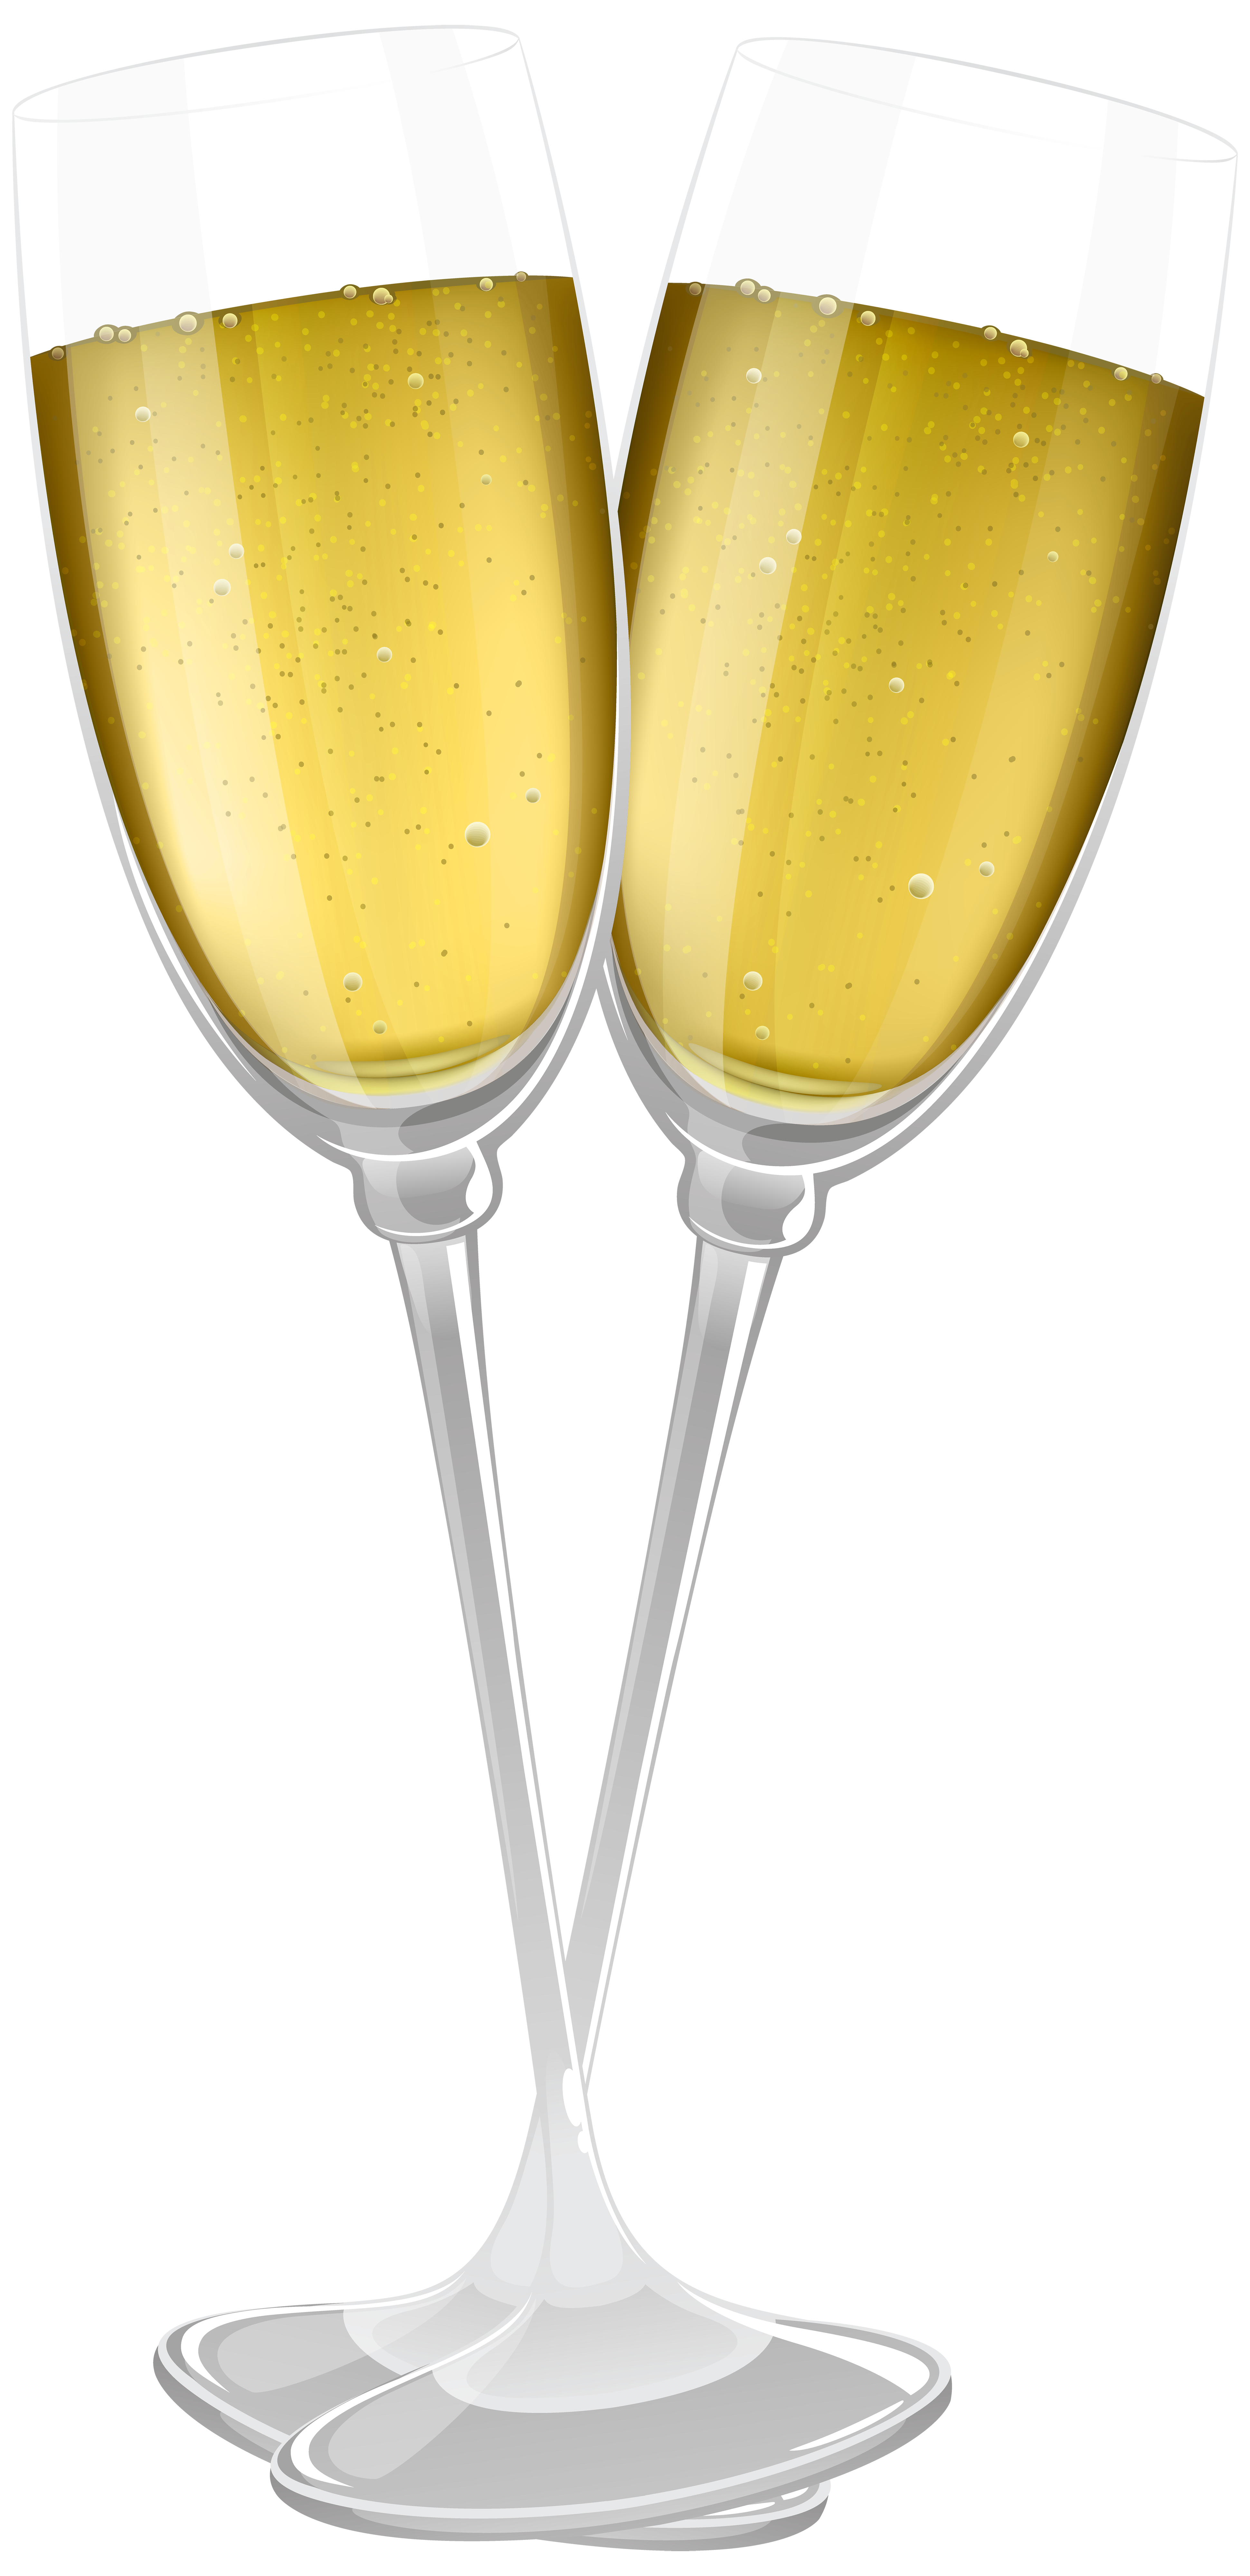 https://gallery.yopriceville.com/var/albums/Free-Clipart-Pictures/Drinks-PNG-/Two_Glasses_of_Champagne_Transparent_Clip_Art_Image.png?m=1516938902